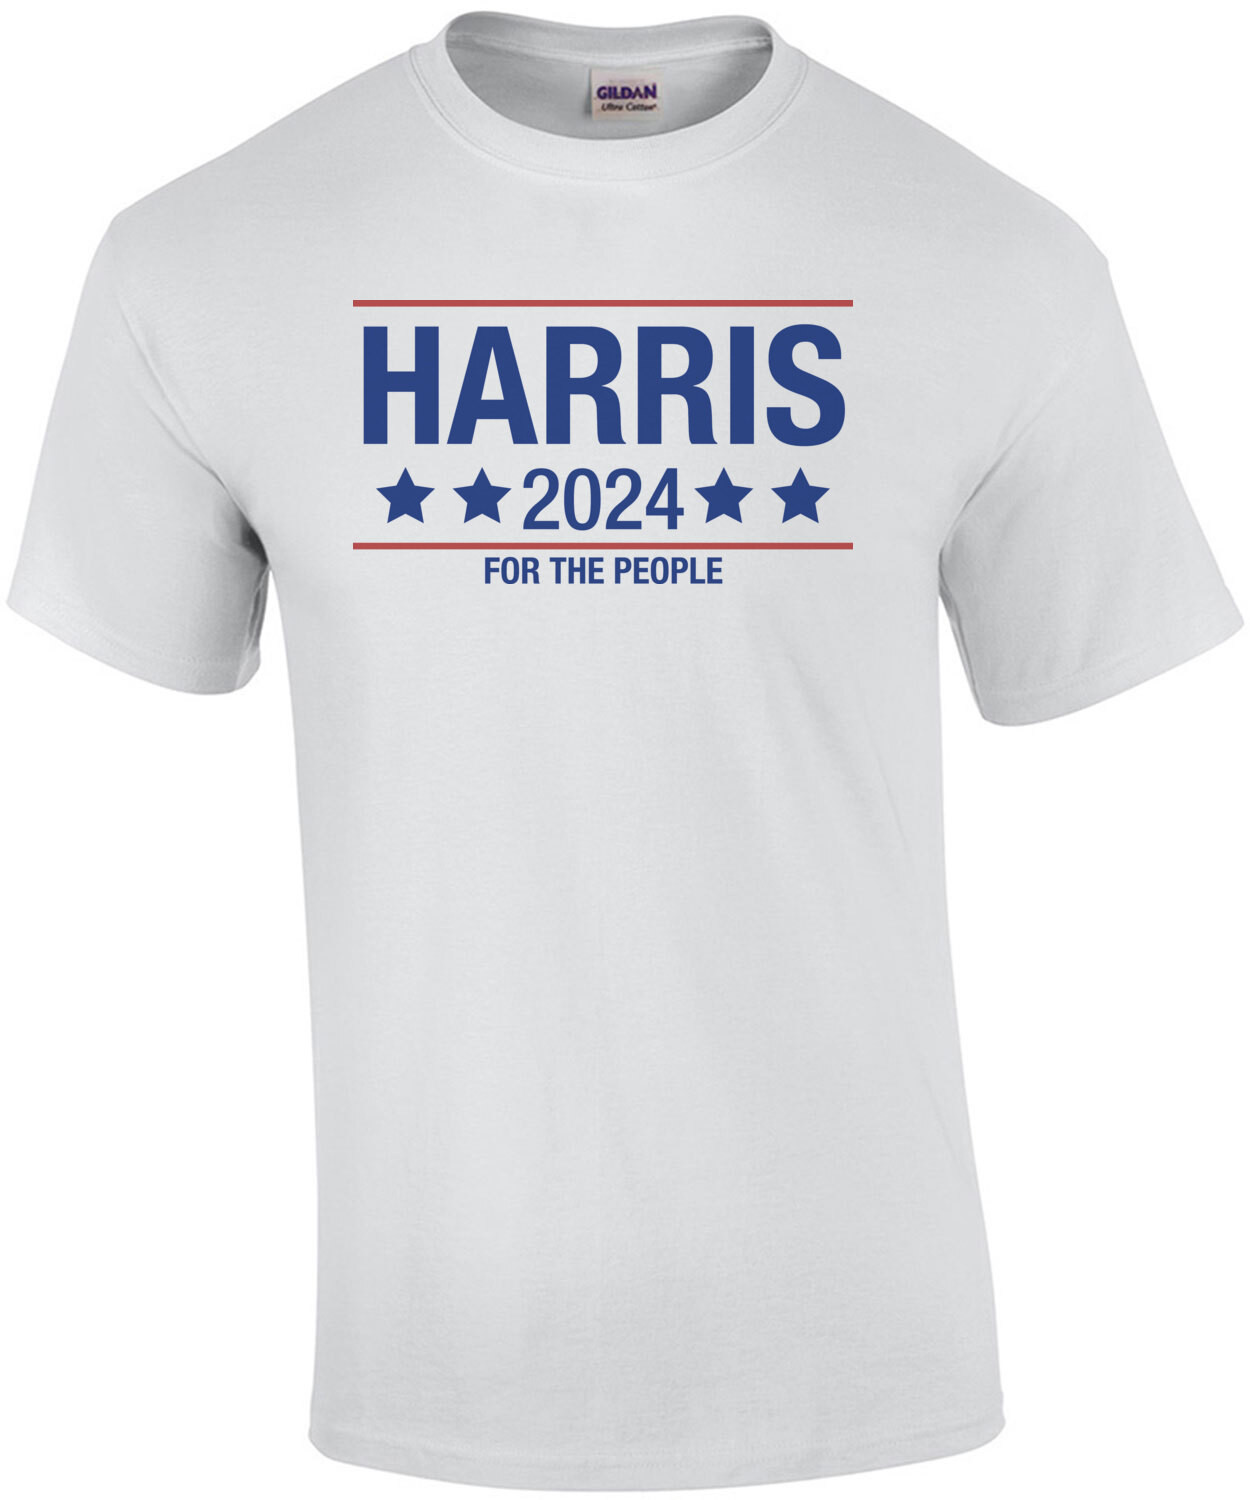 Harris 2024 For The People Shirt